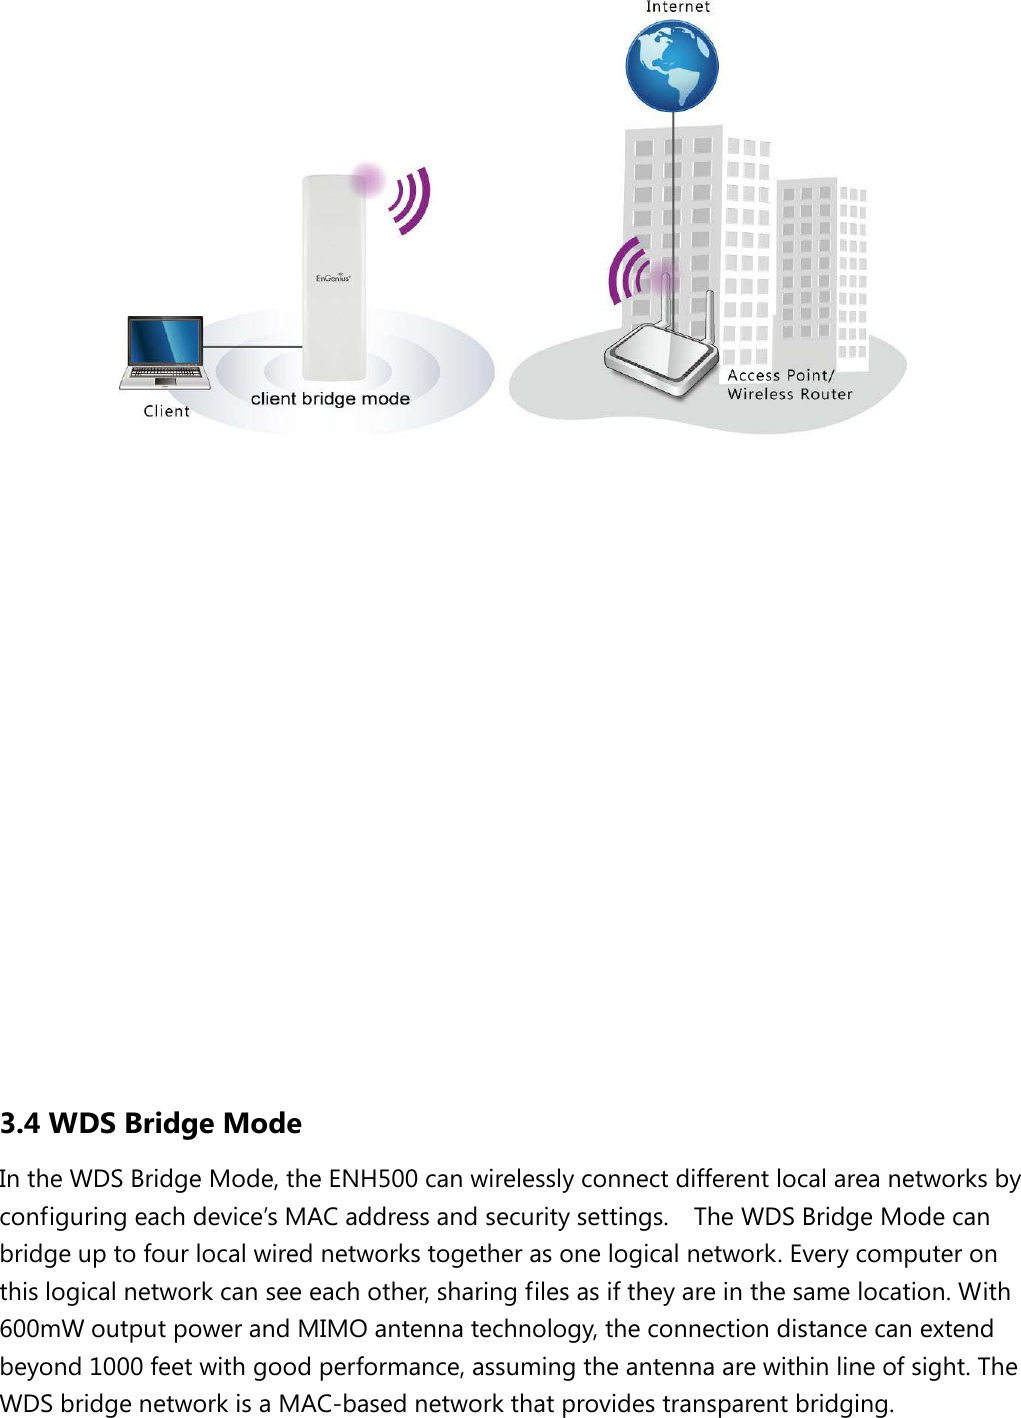                3.4 WDS Bridge Mode In the WDS Bridge Mode, the ENH500 can wirelessly connect different local area networks by configuring each device’s MAC address and security settings.    The WDS Bridge Mode can bridge up to four local wired networks together as one logical network. Every computer on this logical network can see each other, sharing files as if they are in the same location. With 600mW output power and MIMO antenna technology, the connection distance can extend beyond 1000 feet with good performance, assuming the antenna are within line of sight. The WDS bridge network is a MAC-based network that provides transparent bridging.  